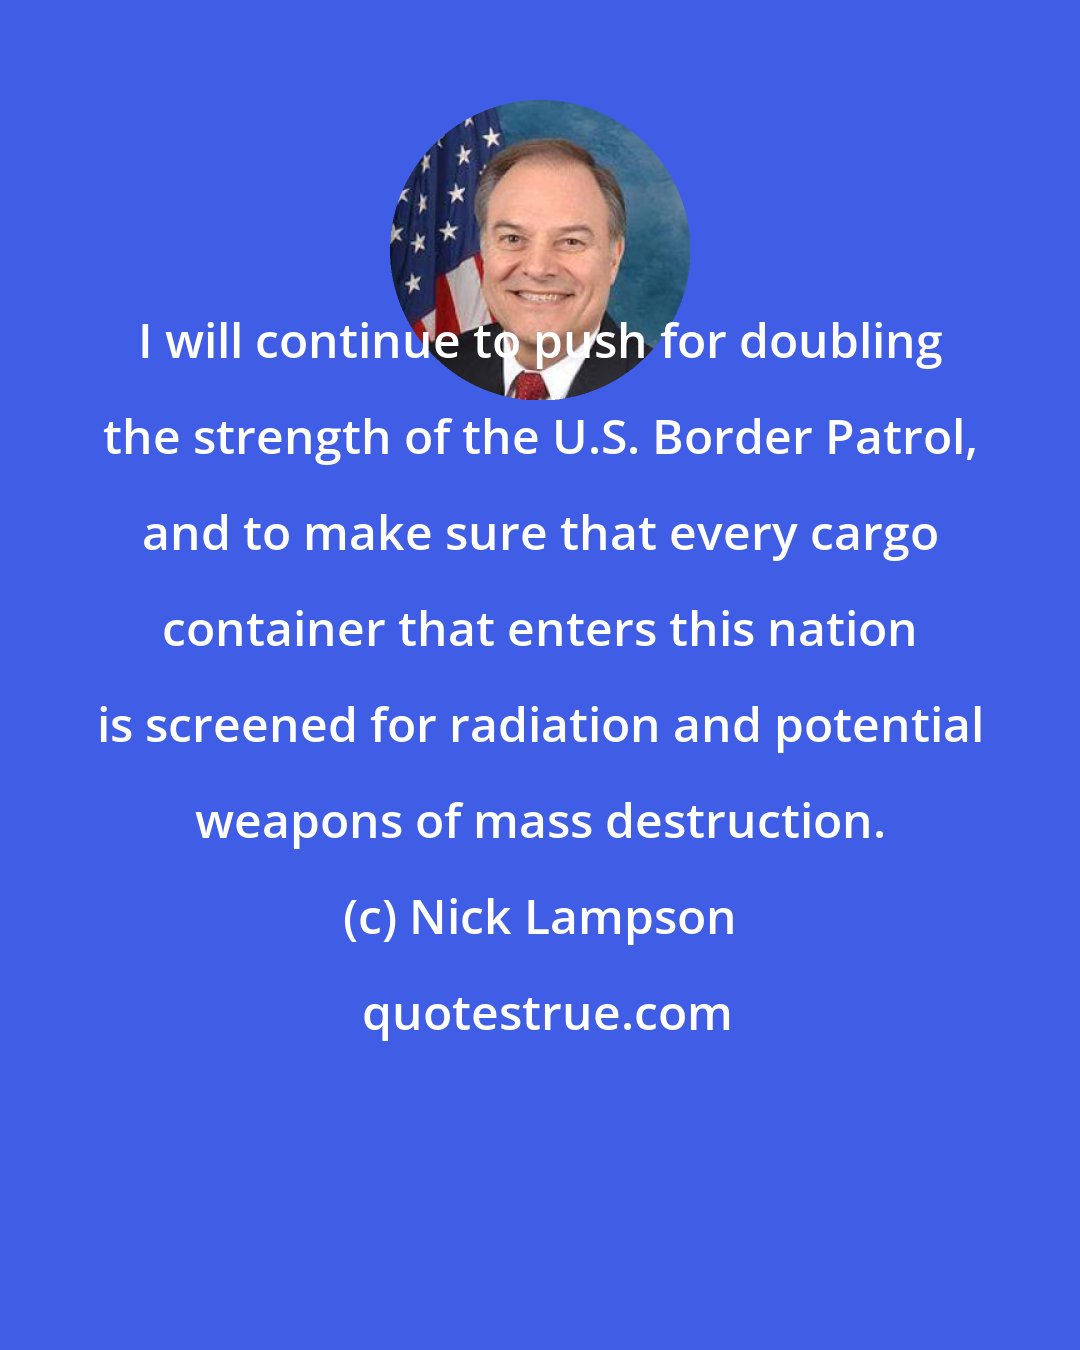 Nick Lampson: I will continue to push for doubling the strength of the U.S. Border Patrol, and to make sure that every cargo container that enters this nation is screened for radiation and potential weapons of mass destruction.